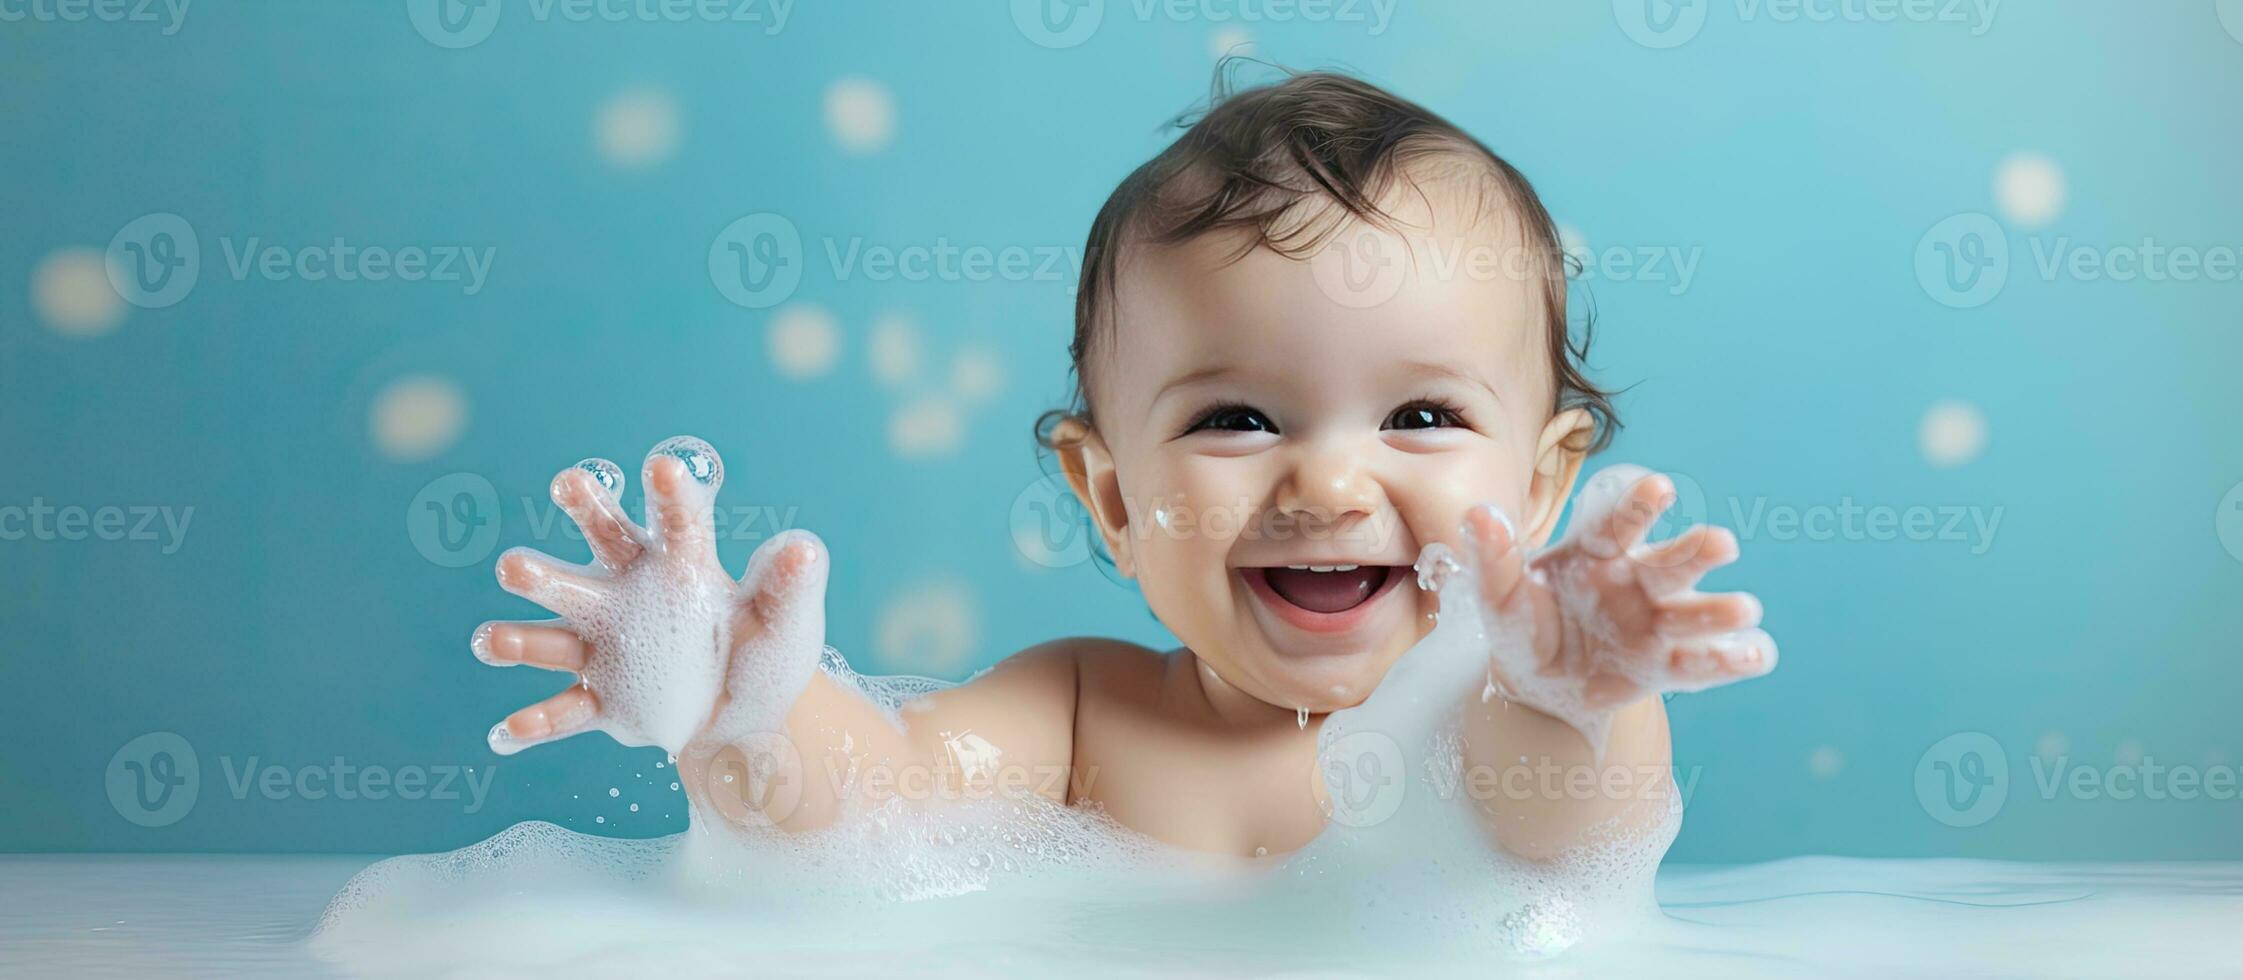 Happy baby demonstrates clean hands emphasizes soap exposure of at least 20 seconds to prevent diseases like viruses and flu Studio photo isolated bann